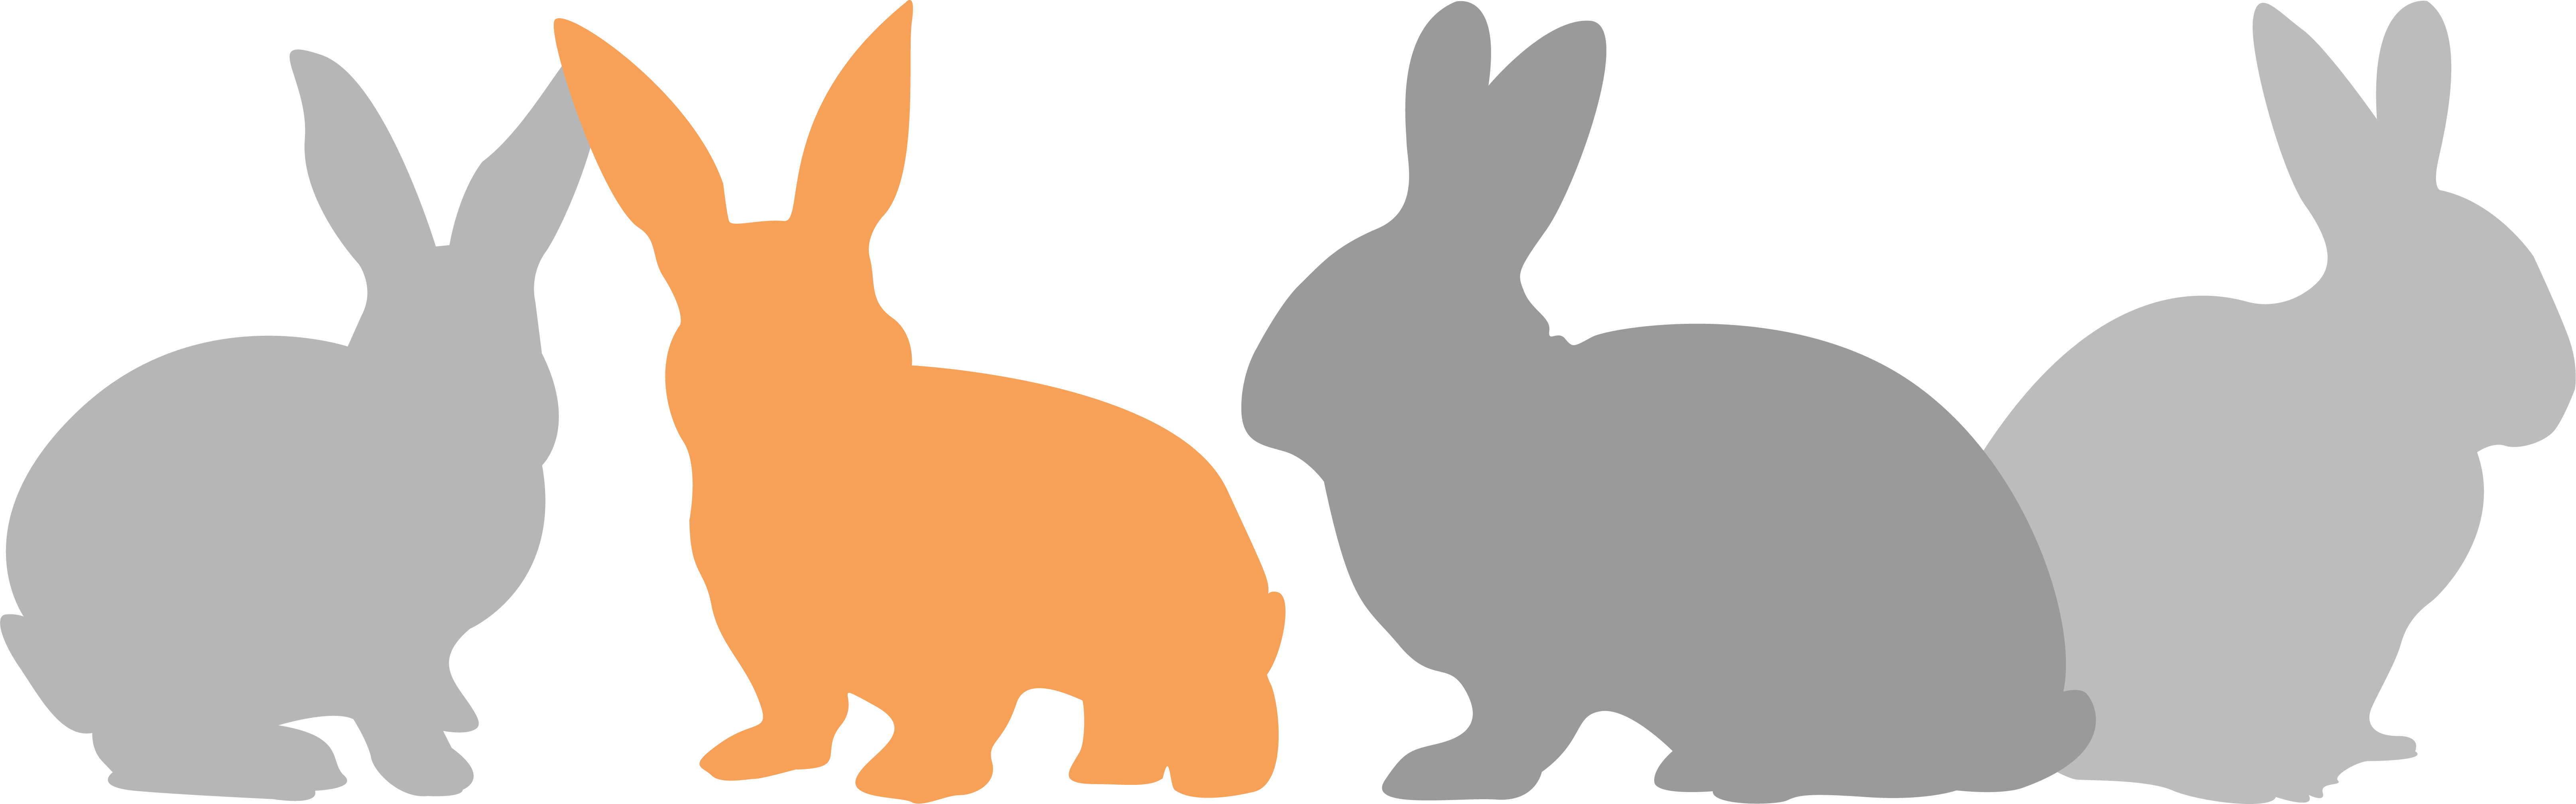 4 bunny silhouette icons